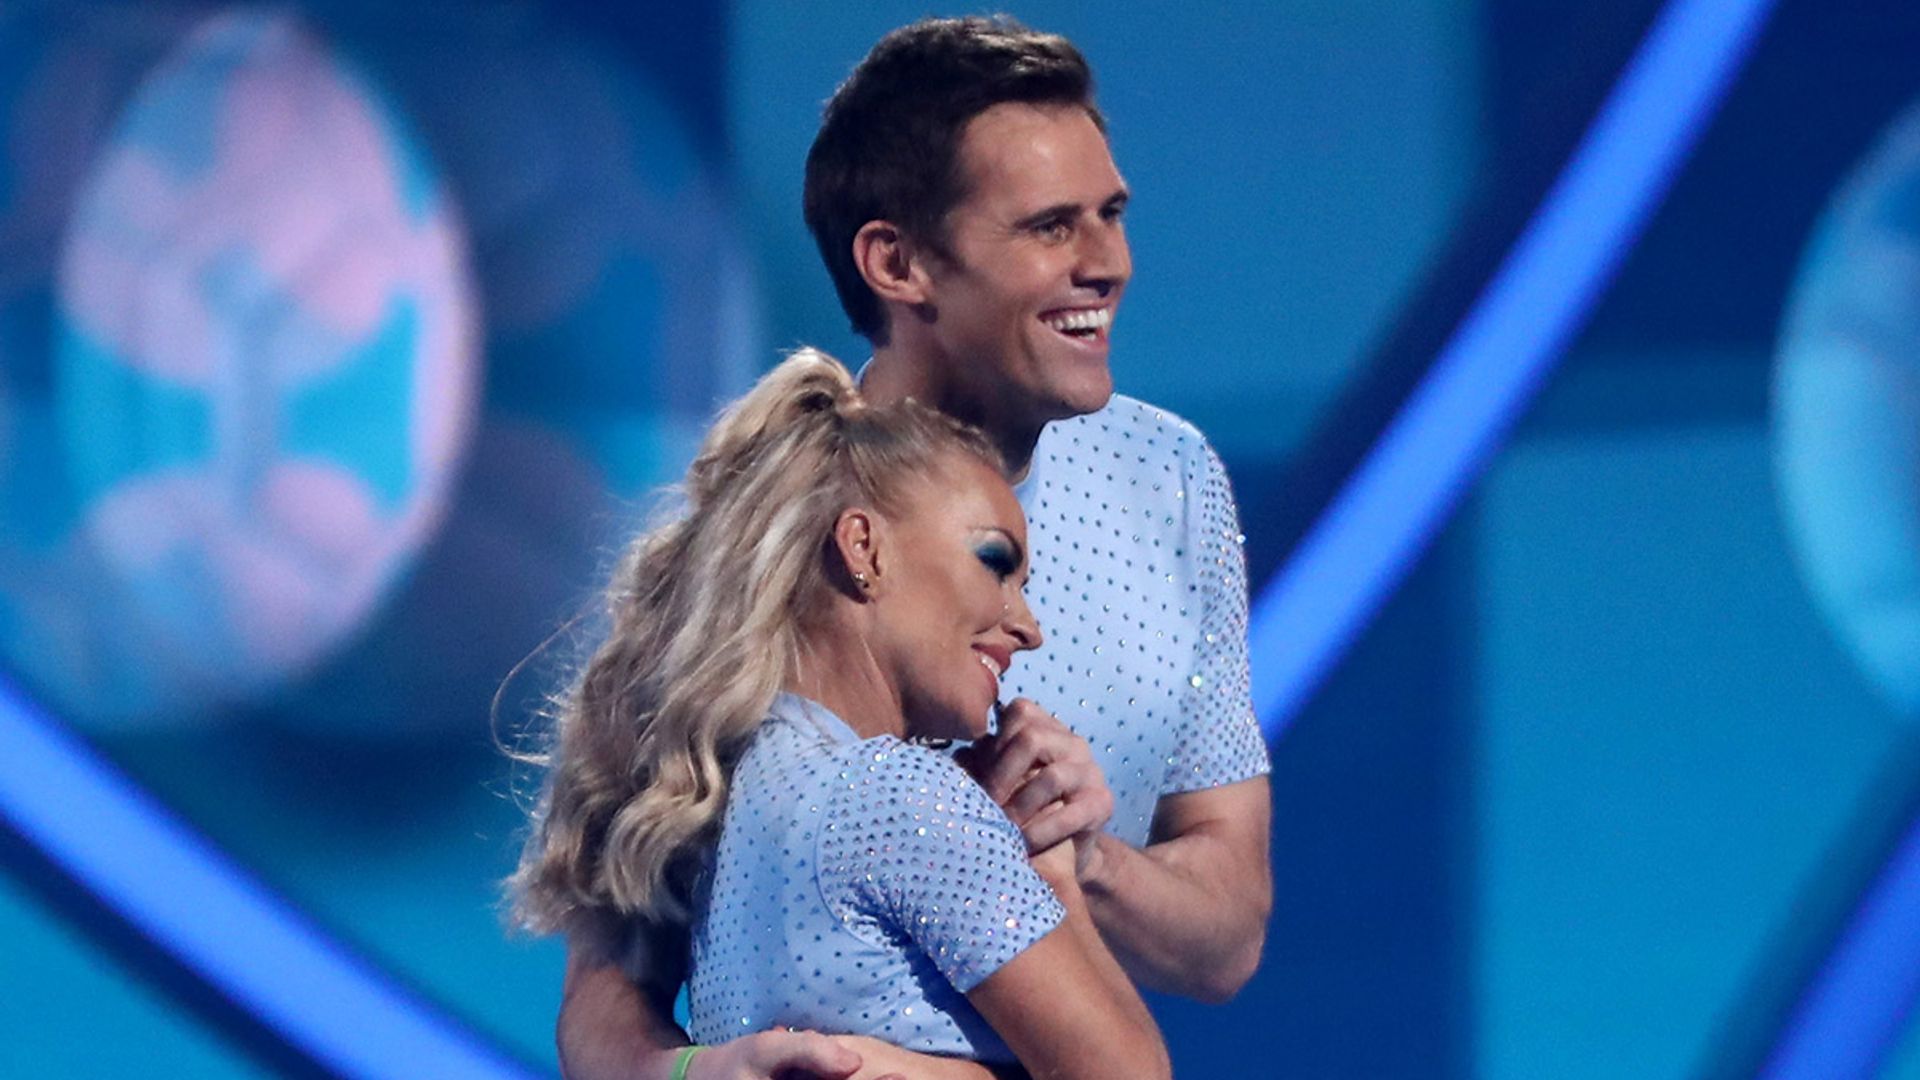 brianne and kevin dancing on ice